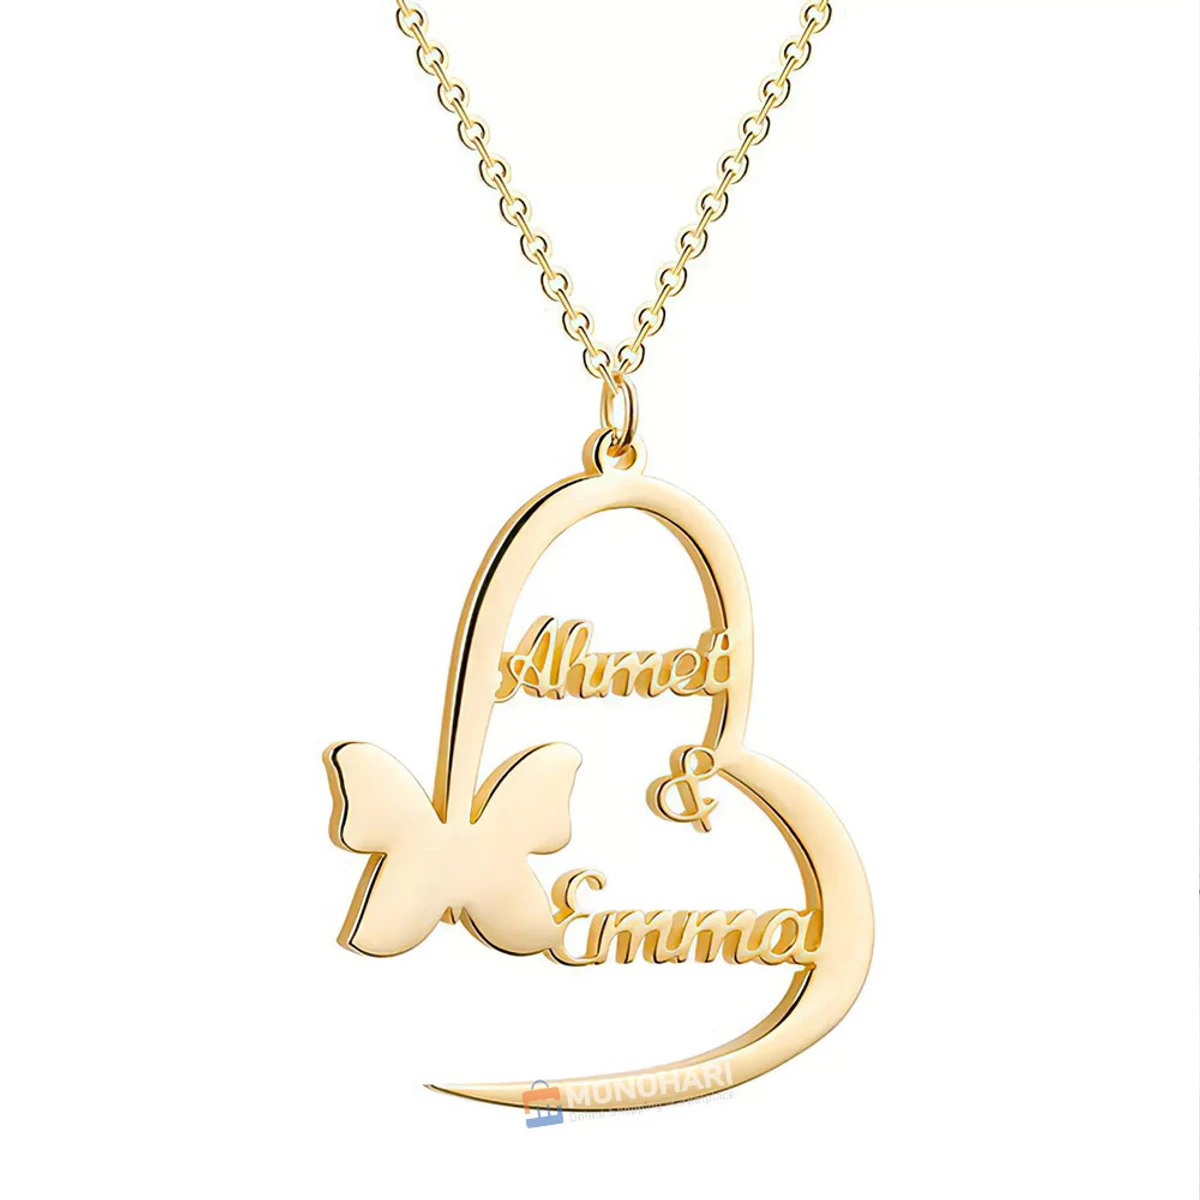 Couple Name Necklace (James & Amanda) Covered Heart & Butterfly Shape 22K Gold Plated Customized Necklace